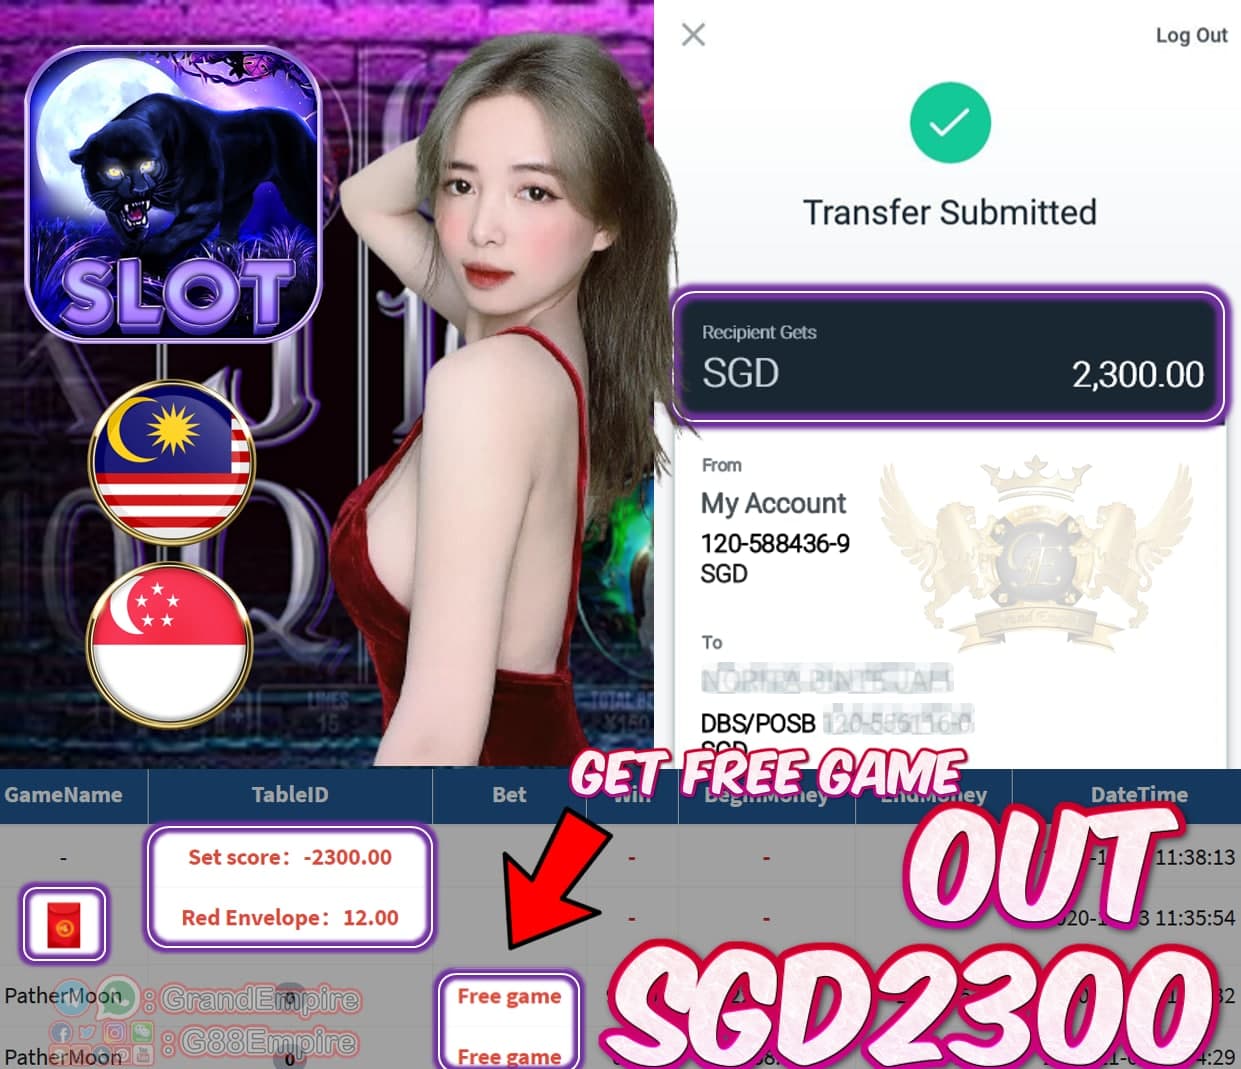 MEMBER MAIN PARTHER MOON OUT SGD2300!!!